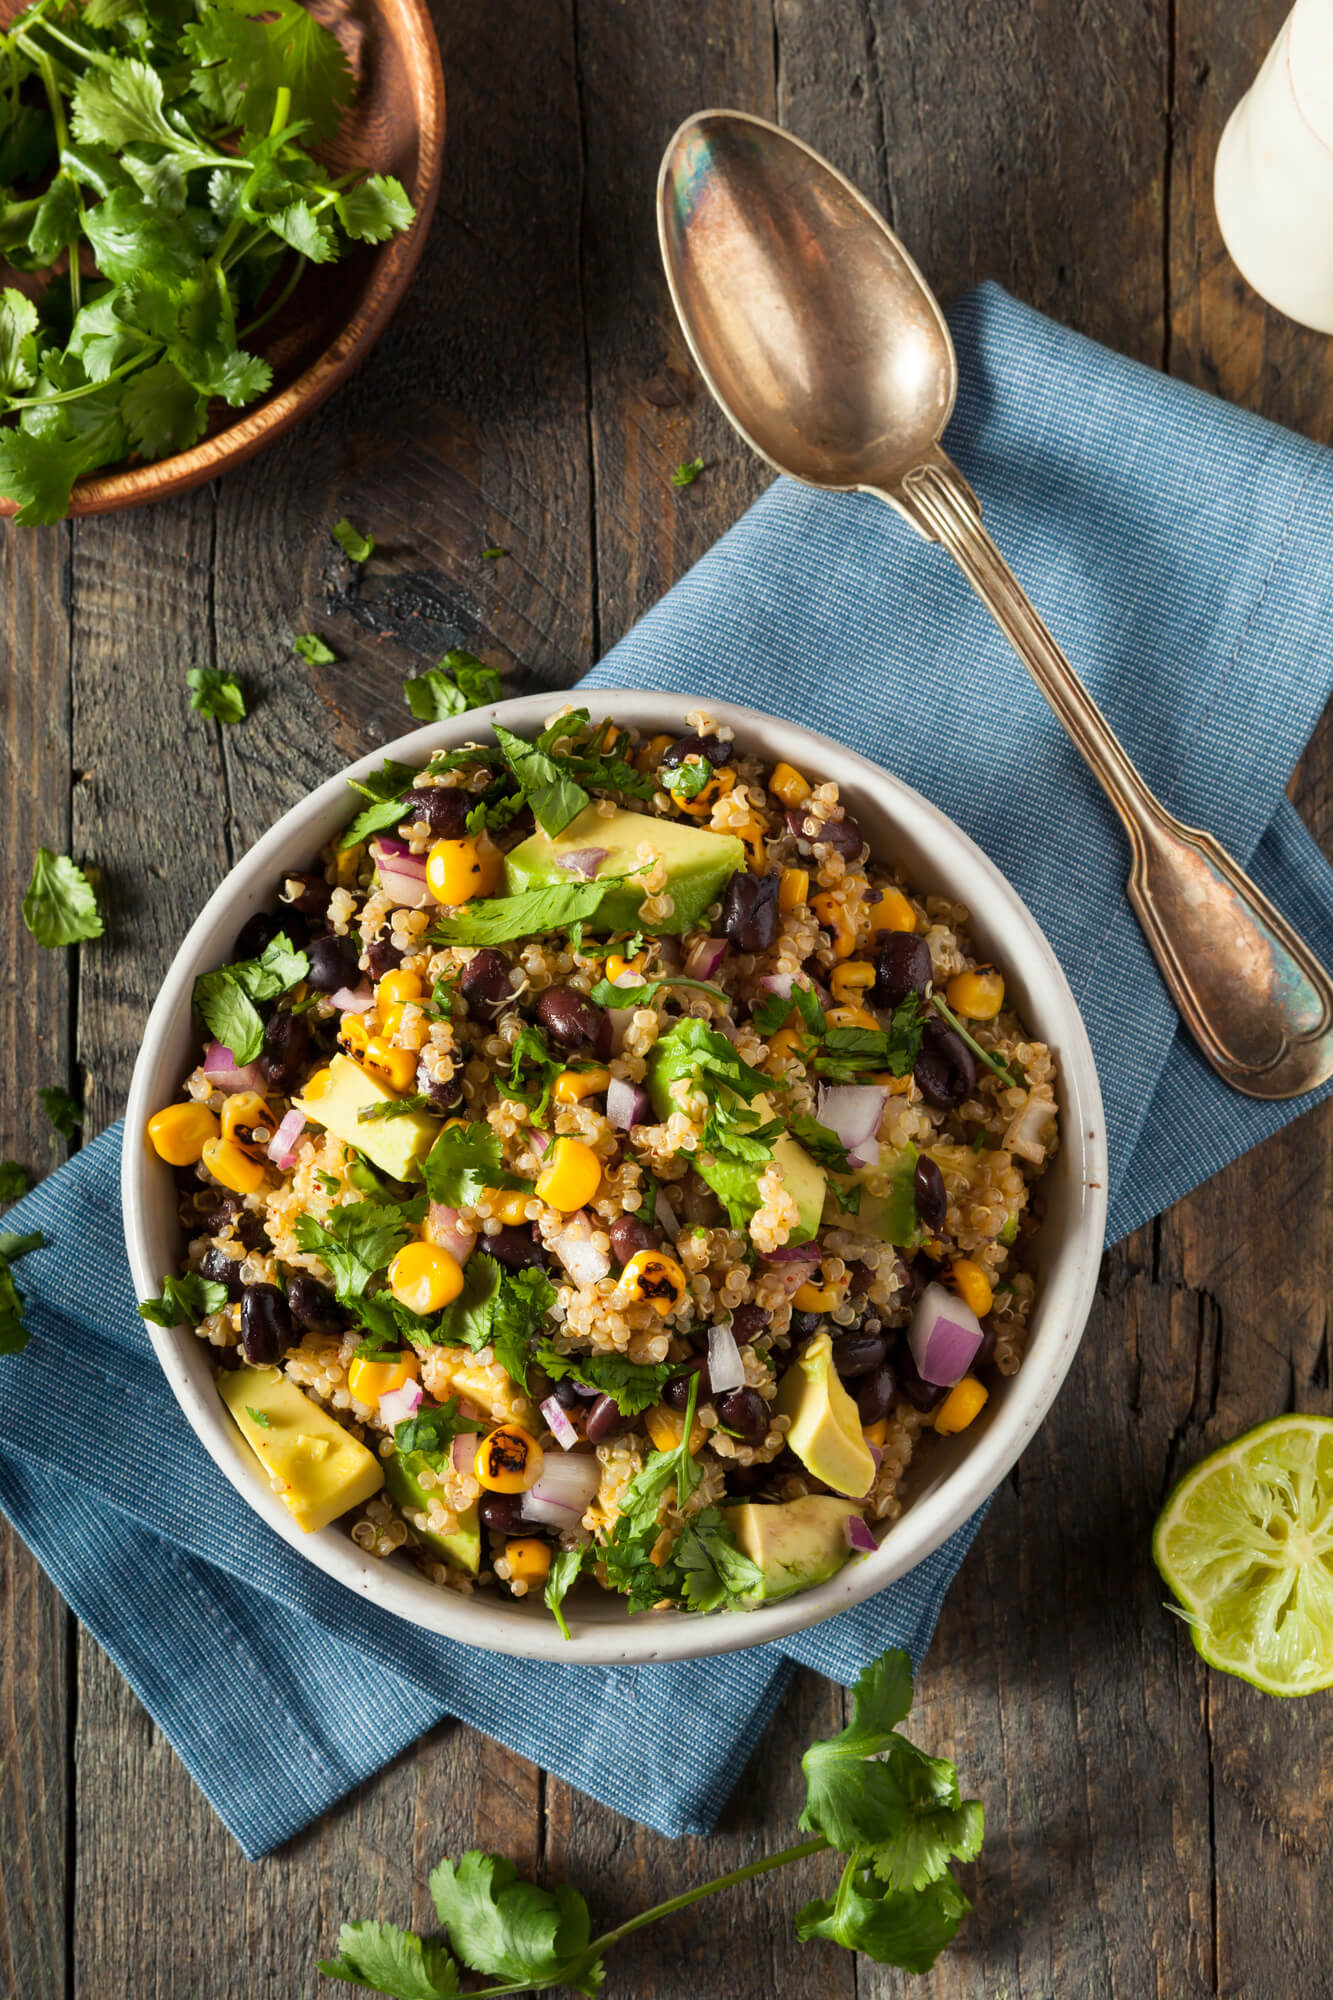 Southwestern Quinoa salad with black beans, corn, and avocado in a bowl with a spoon.